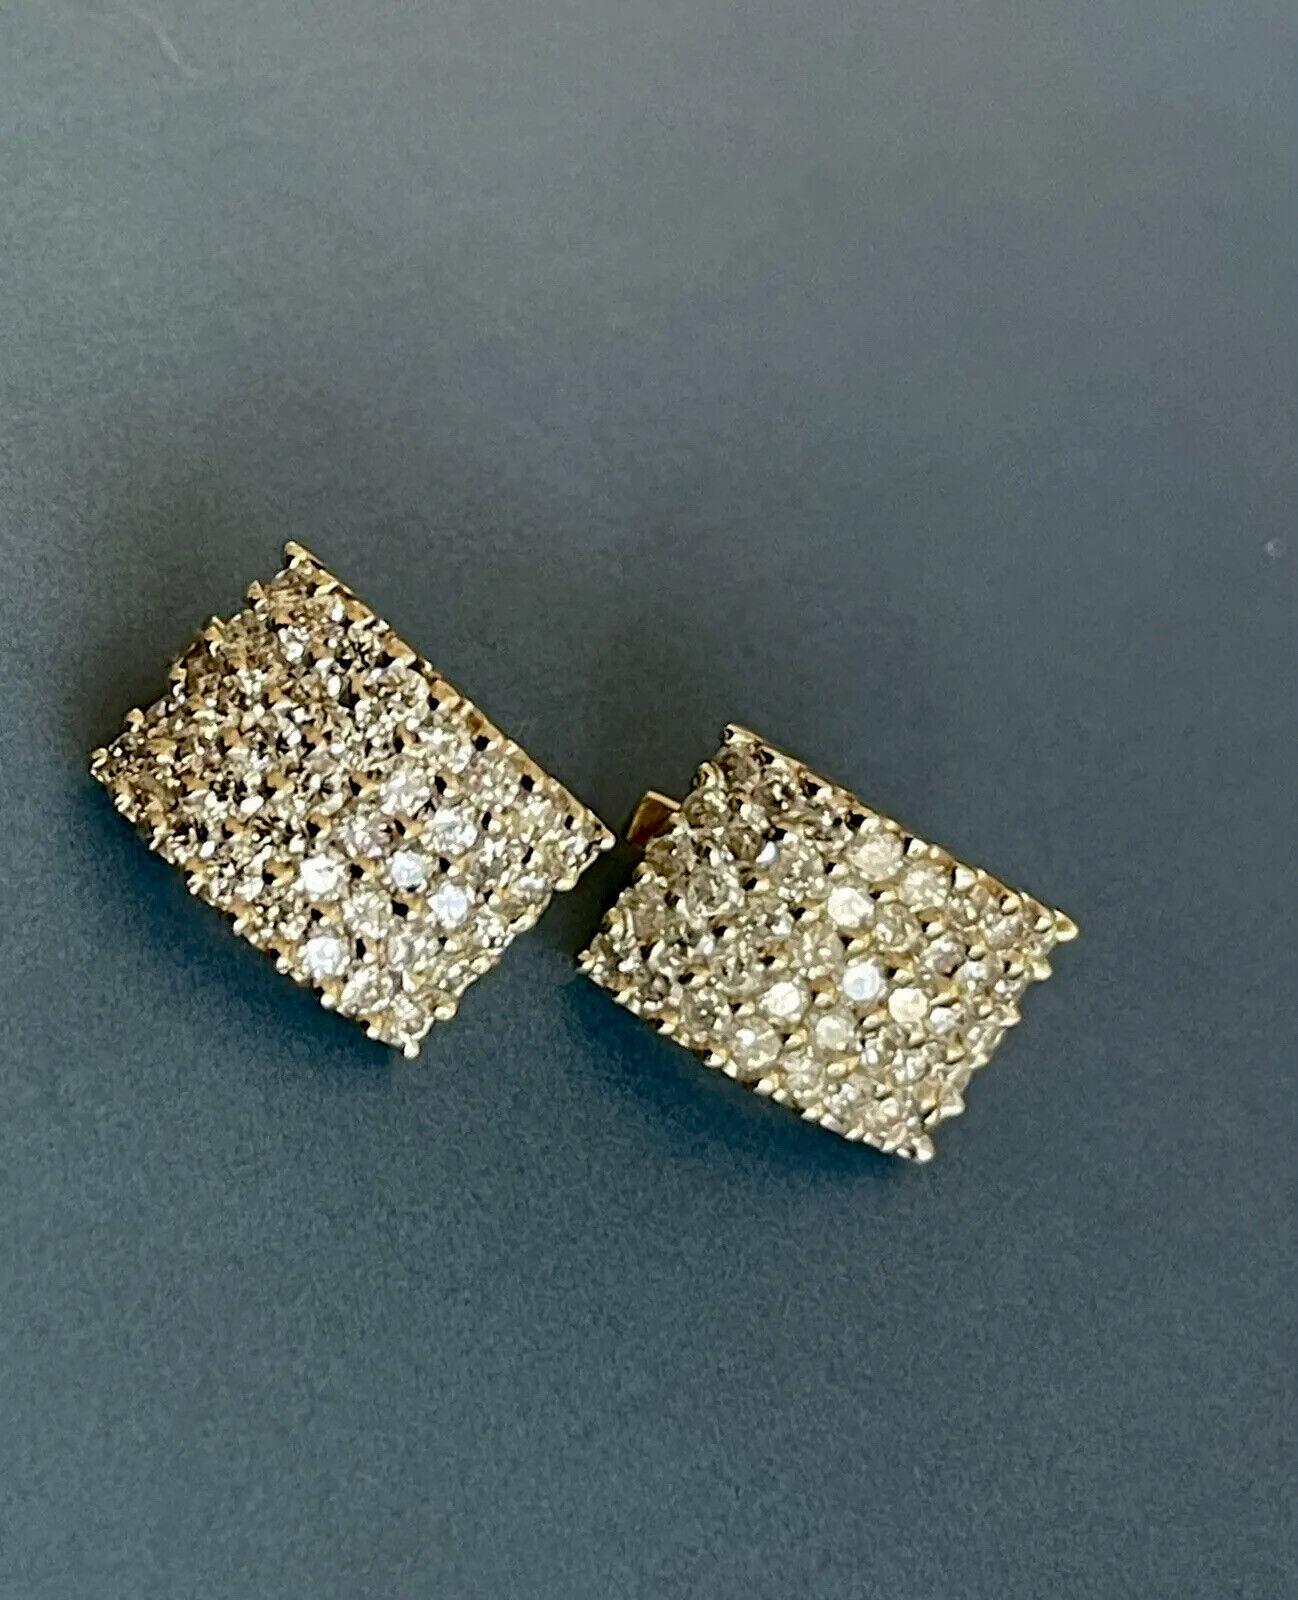 14ct yellow Gold Diamond Earrings 4ct Square Checkered leverback Studs hoop In New Condition For Sale In Ilford, GB